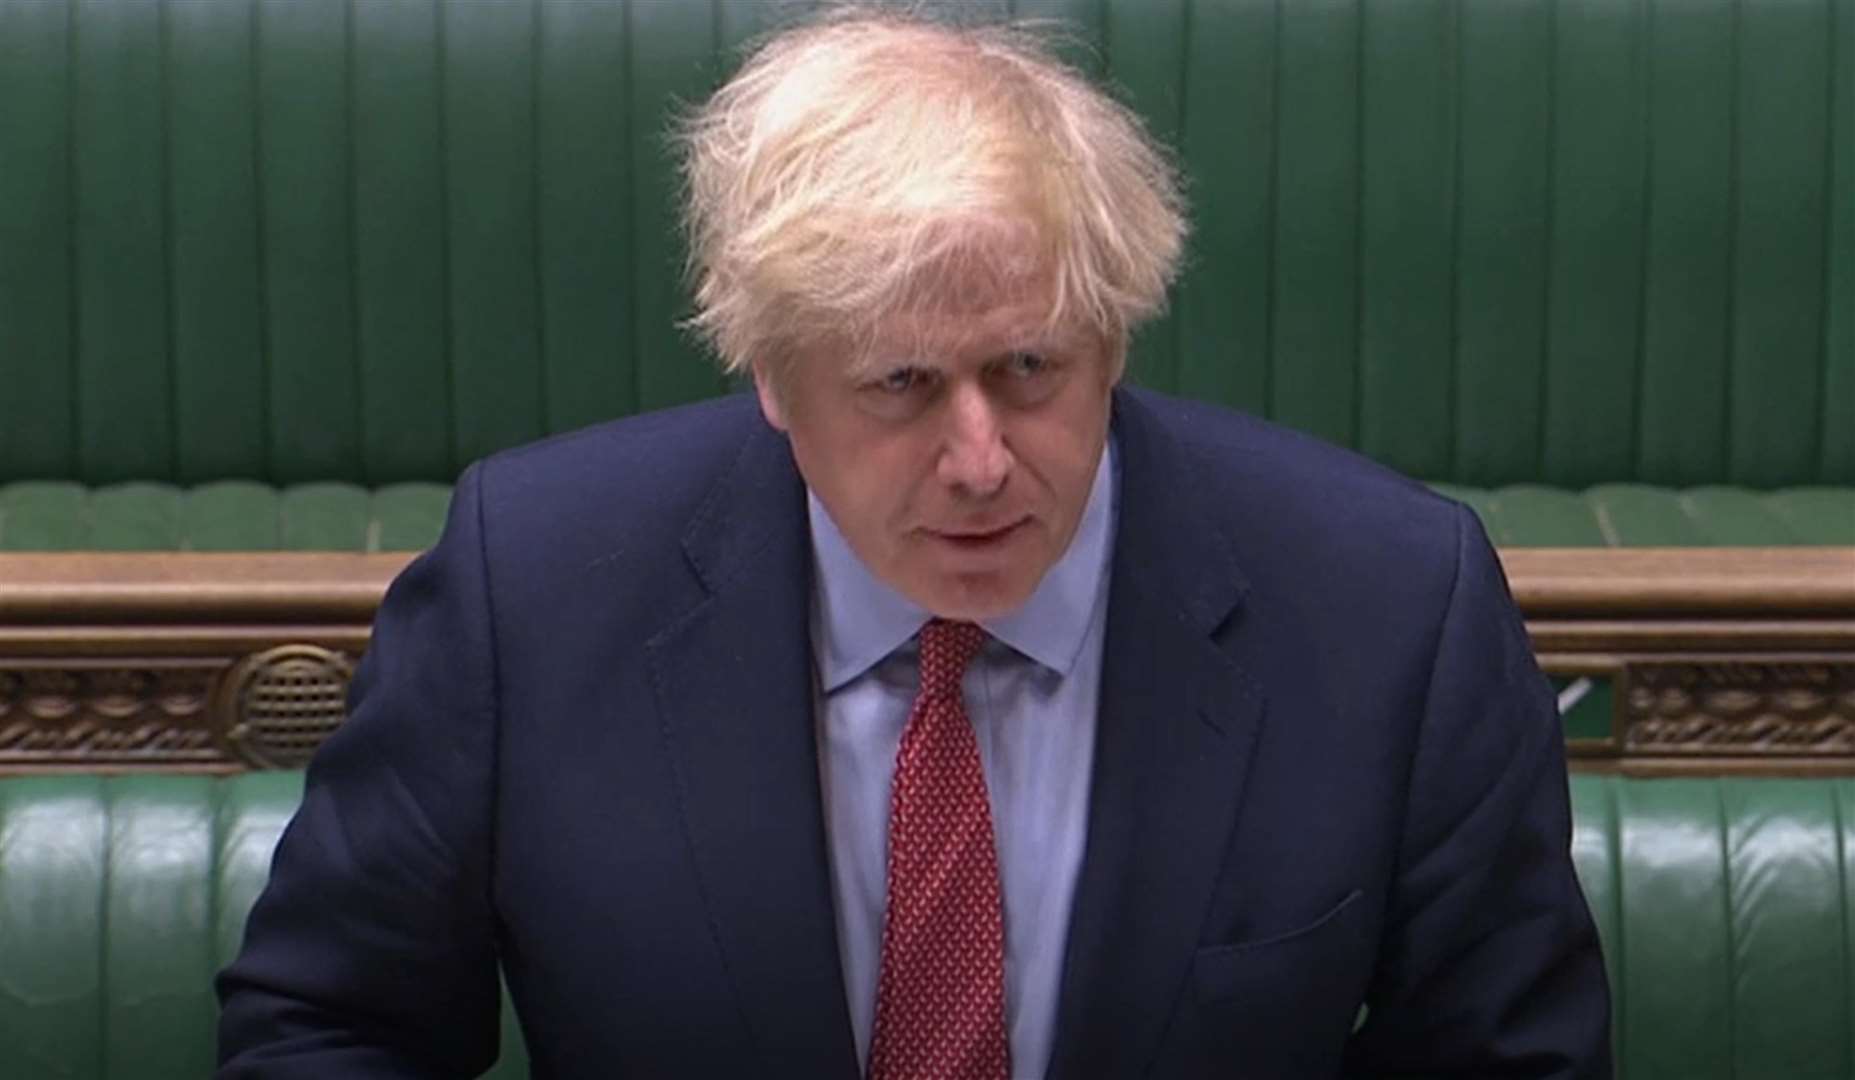 Prime Minister Boris Johnson went into hospital with his coronavirus symptoms the day police officers are reported to have spoken to Dominic Cummings’ family about his travels to Durham (House of Commons)